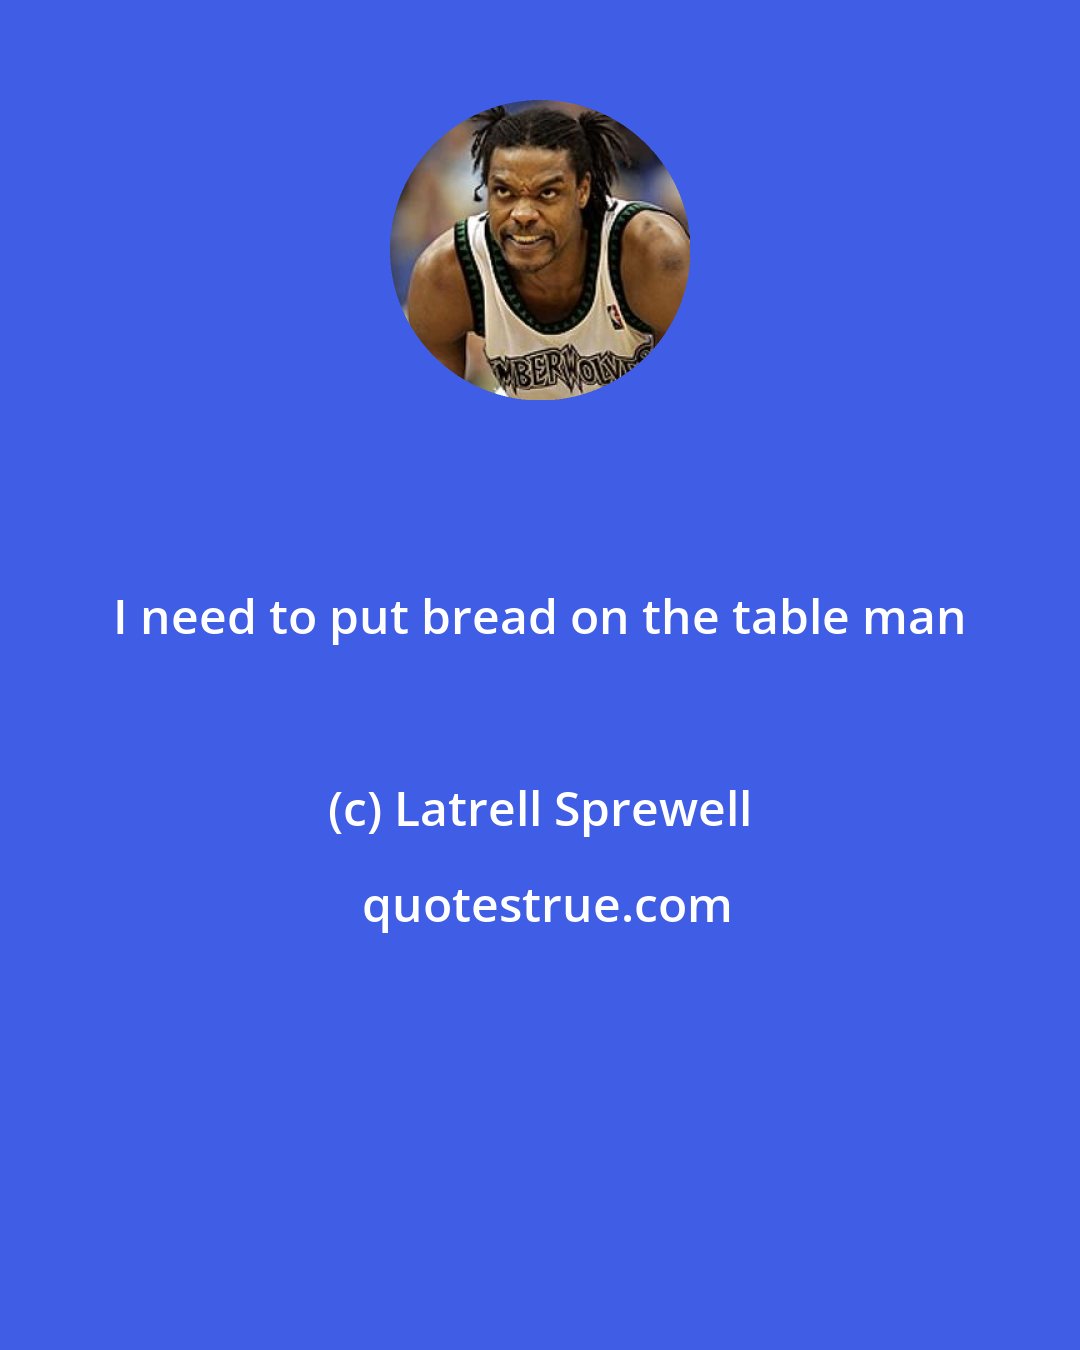 Latrell Sprewell: I need to put bread on the table man